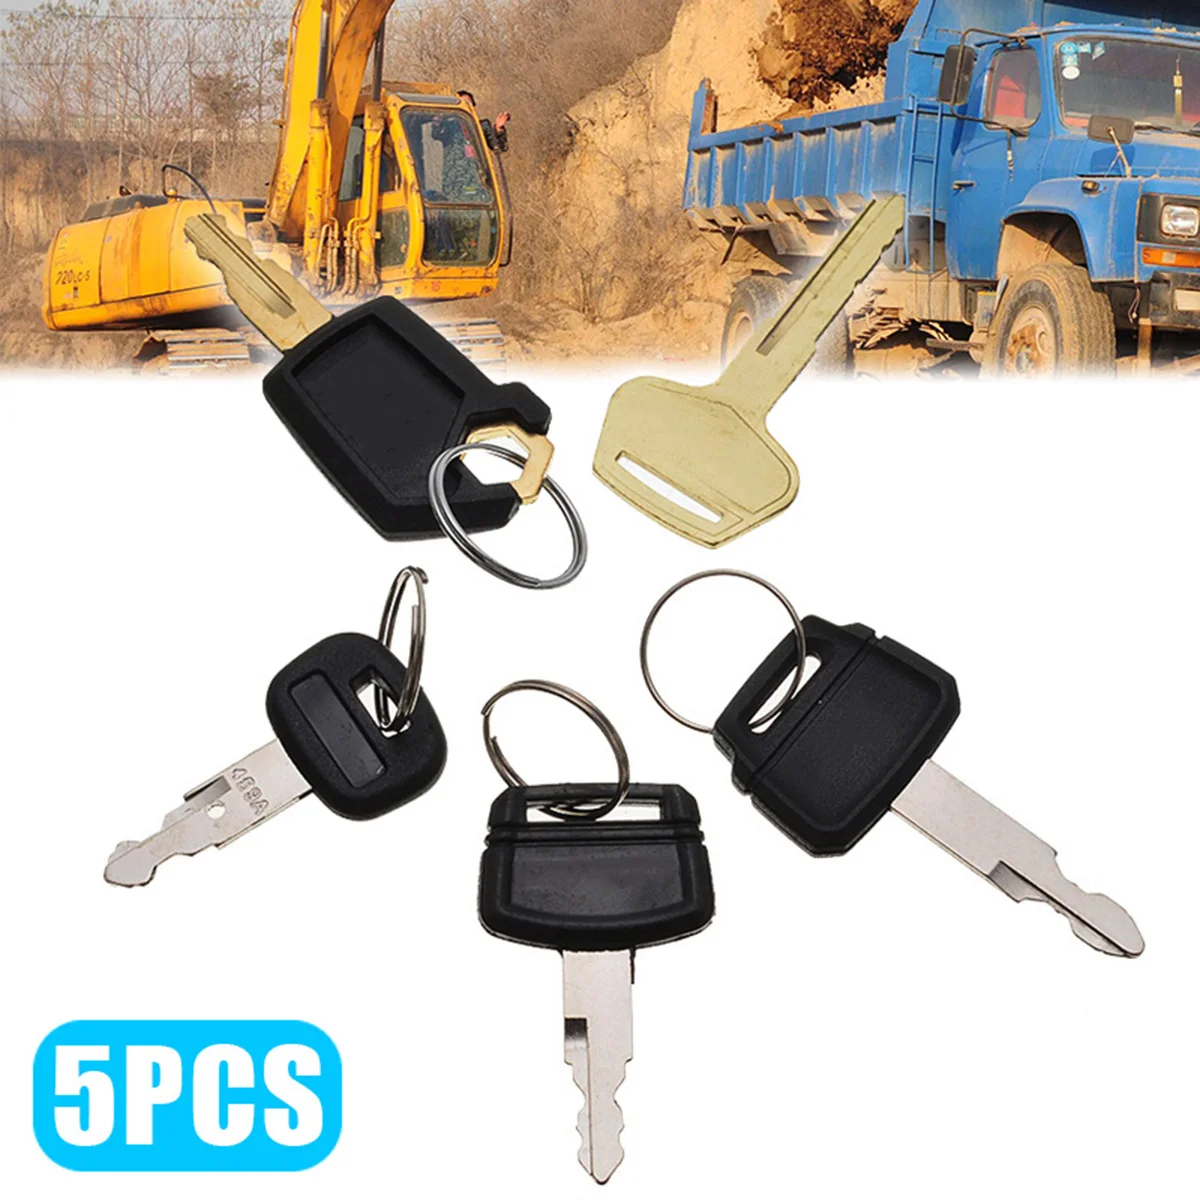 Roller 10PCS Ignition starter Key Set Agricultural/Excavator Machinery,Universal Ignition Switch Spare Keys Suitable for Excavator Machinery-Factories-Dump Trucks-Tractors-Bulldozers